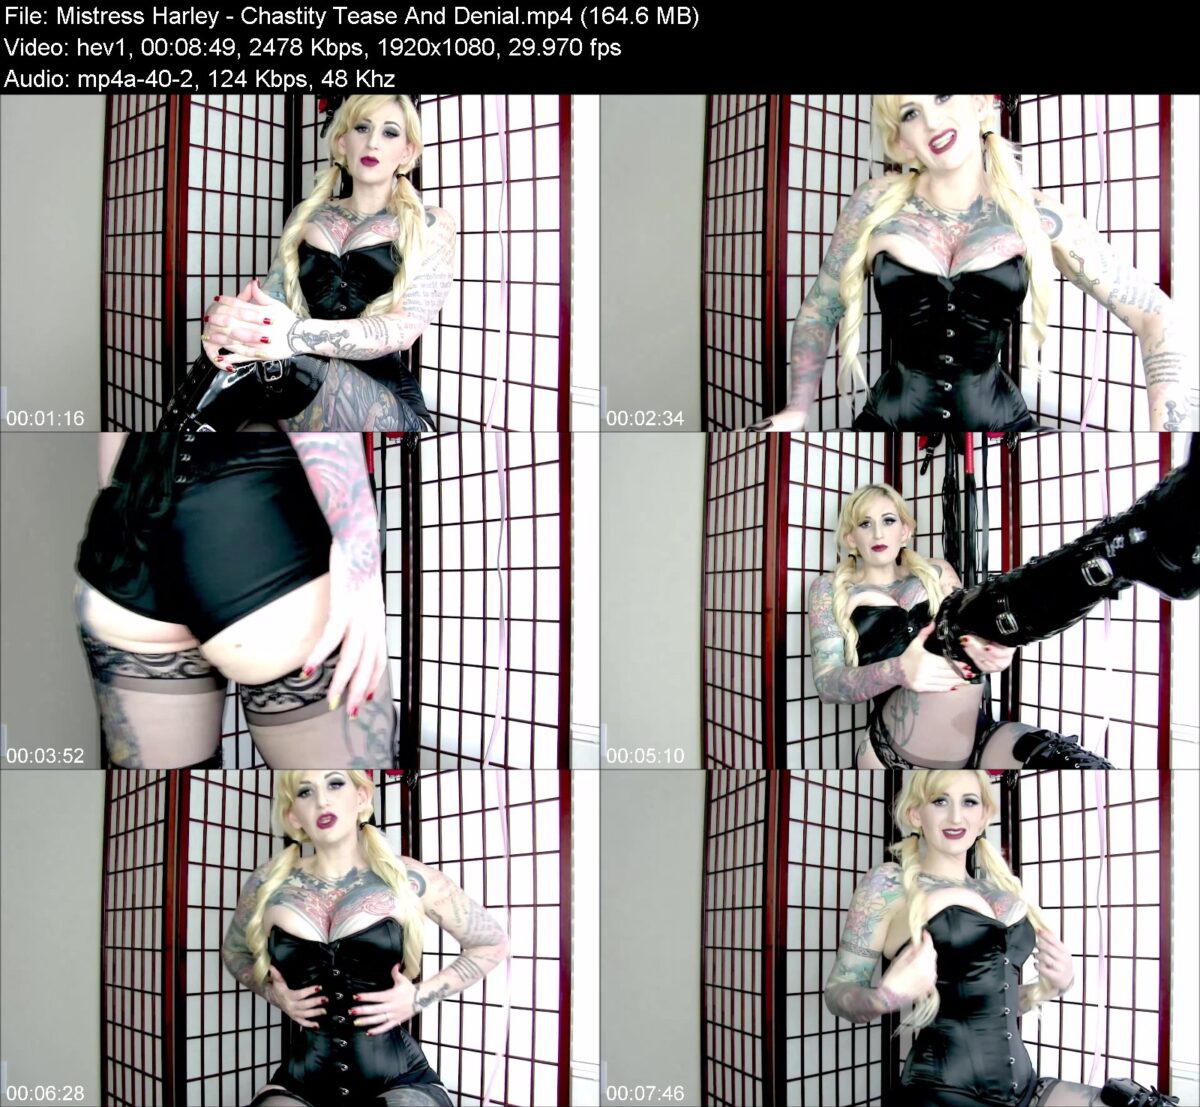 Mistress Harley - Chastity Tease And Denial